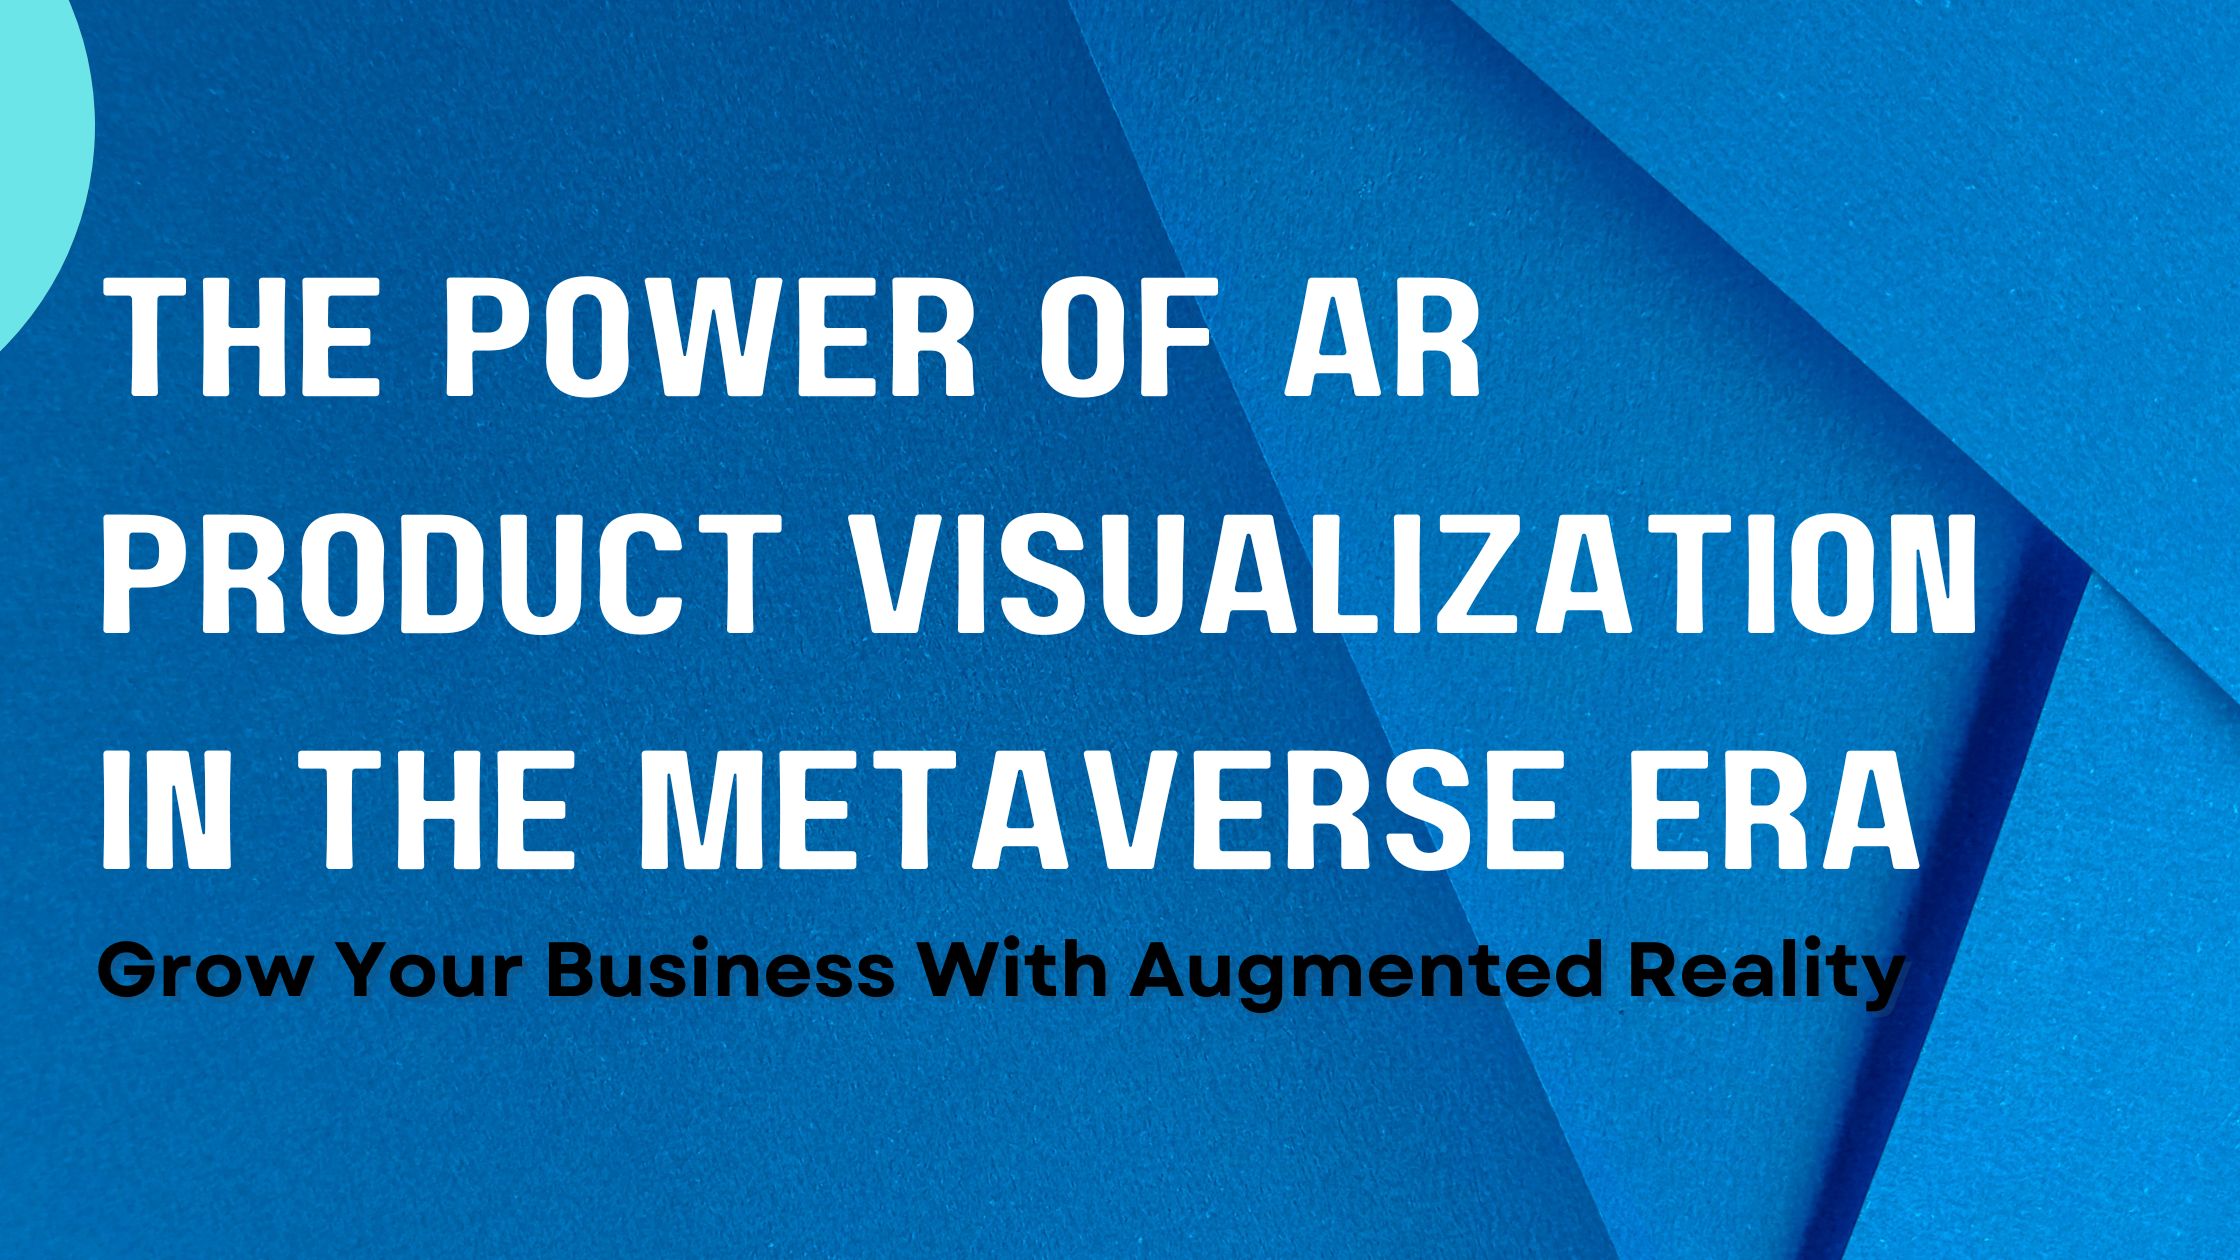 The Power of AR Product Visualization in the Metaverse Era